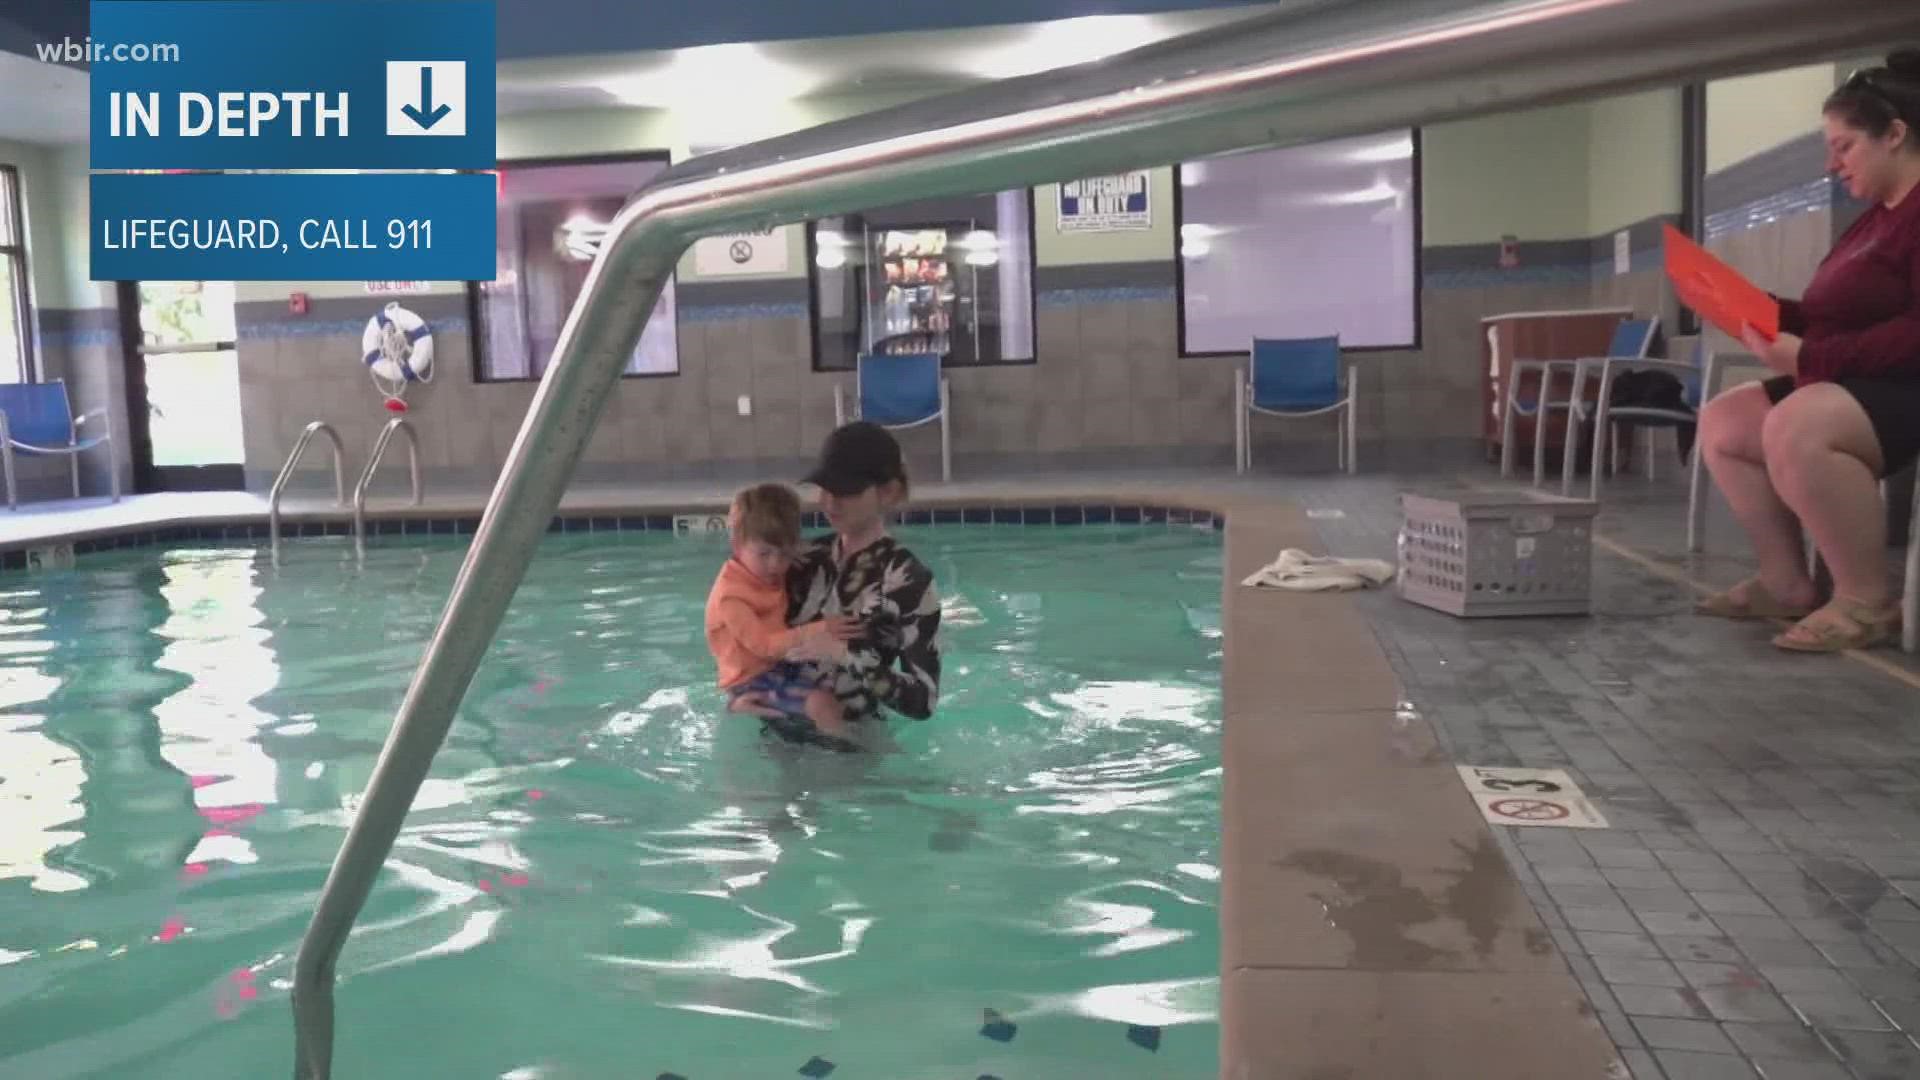 A certified infant swimming resource instructor said drowning is the leading cause of accidental death in children between 1 year old and 4 years old.